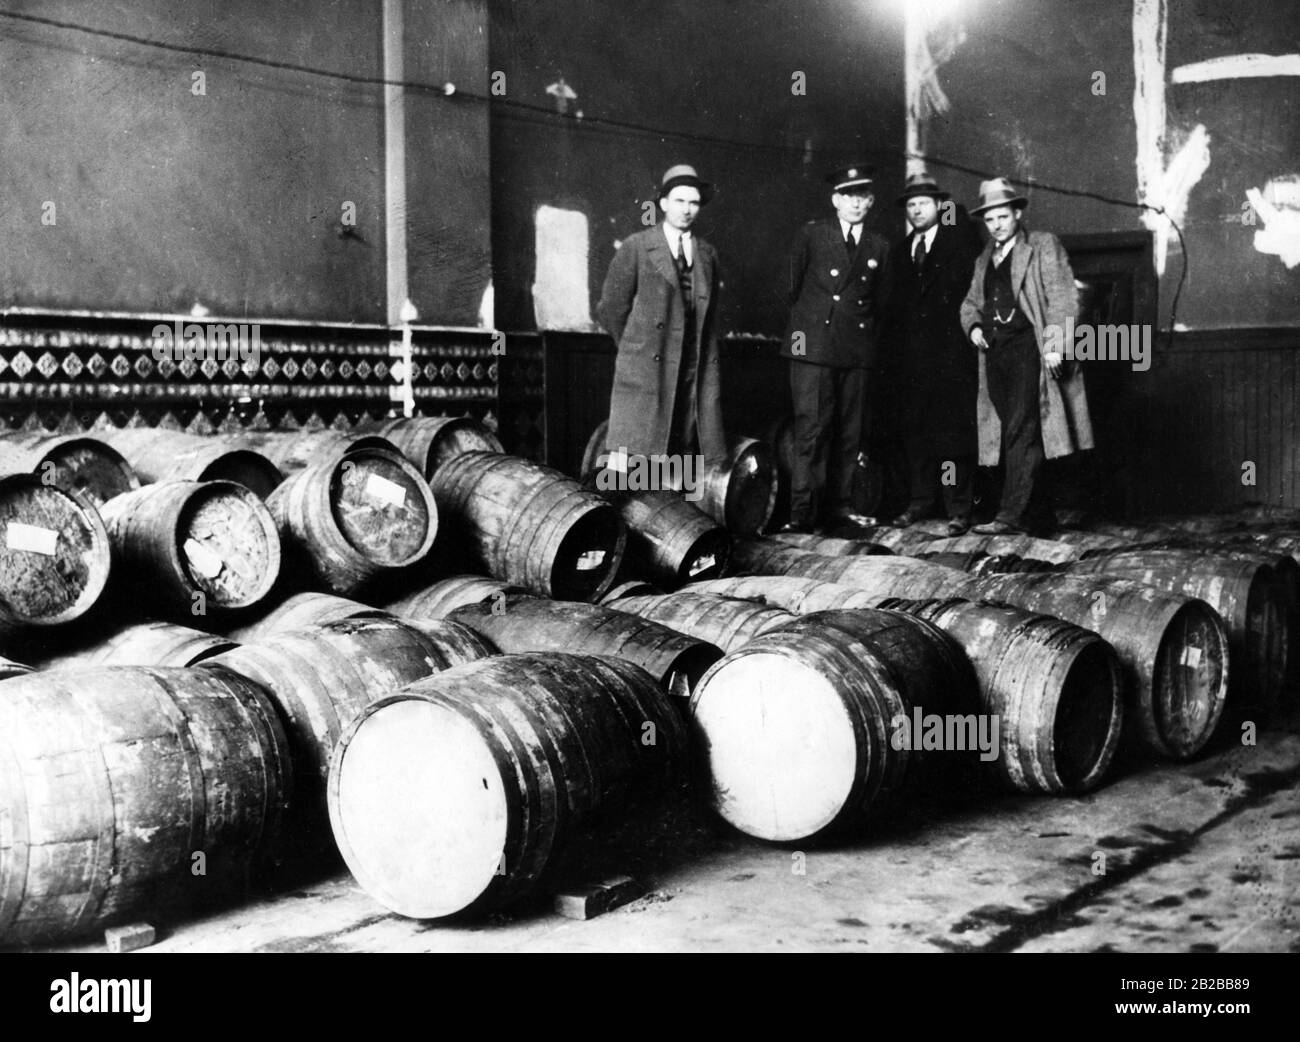 Prohibition: Policemen of the raiding squad (L.J. Broderick, Captain La Reau, Frank Butler and Robert Farron) and barrels with confiscated alcohol from Daniel Dever in Philadelphia. Stock Photo